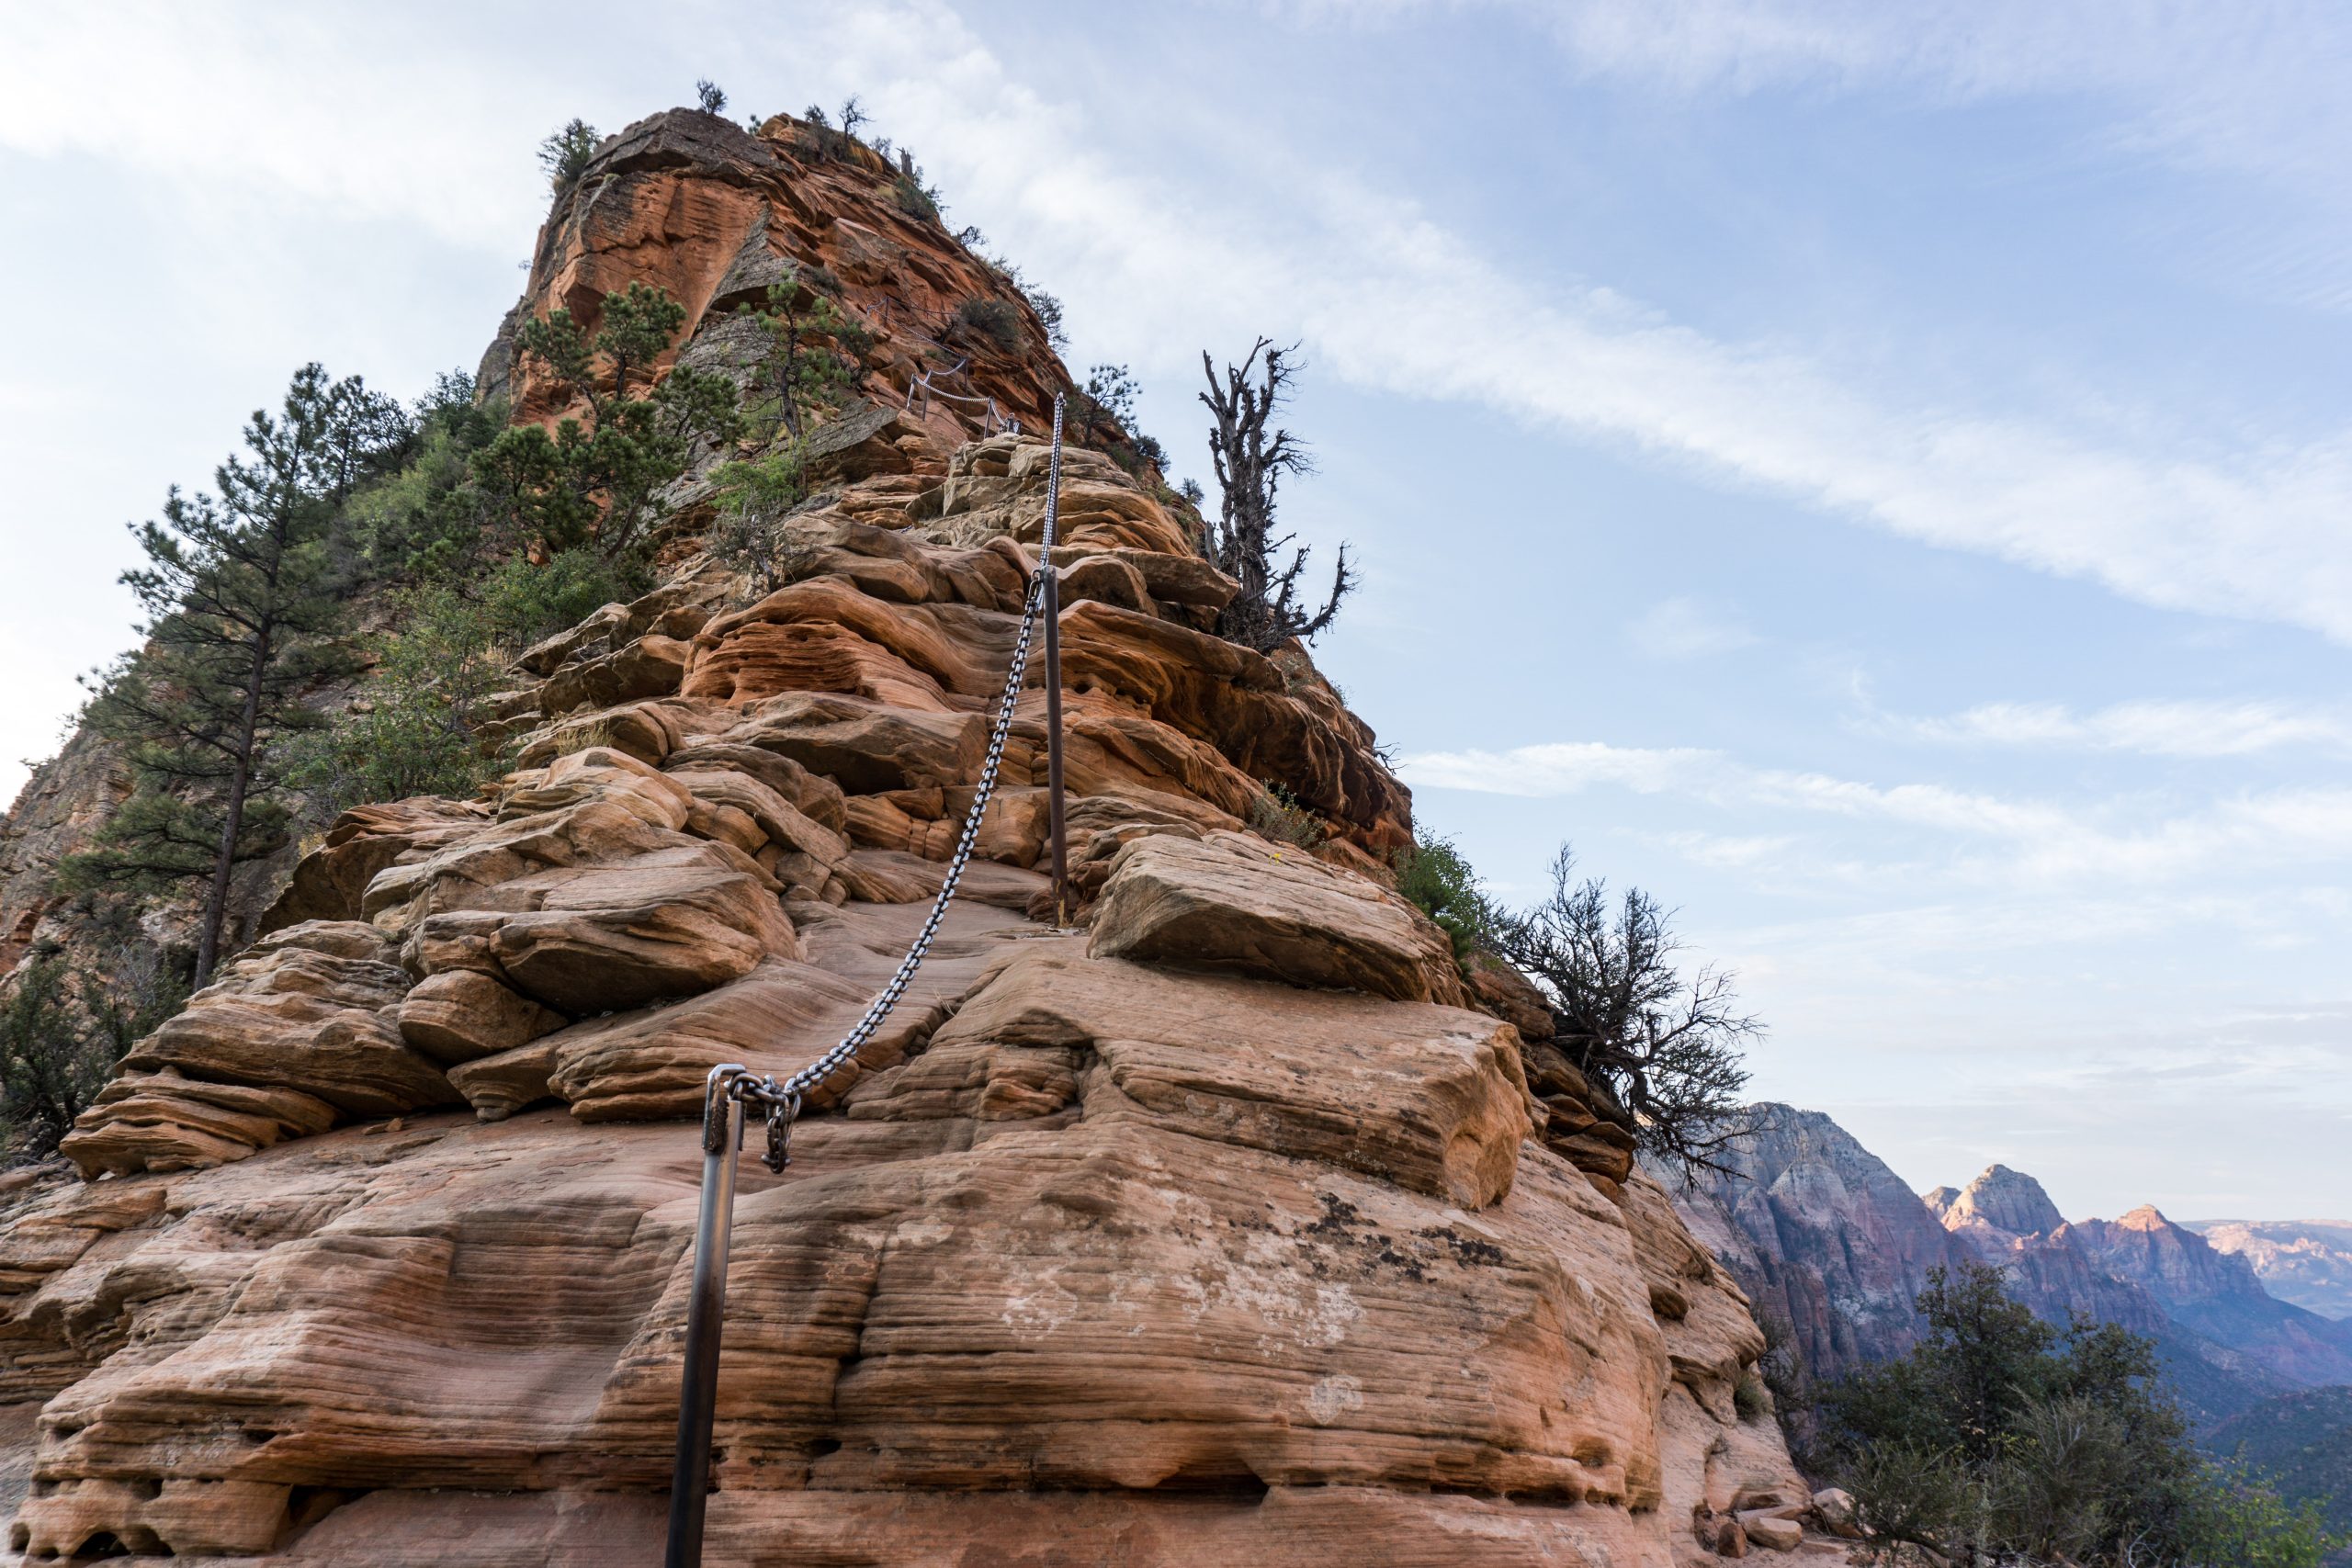 Do I need a permit to hike Angel’s Landing?